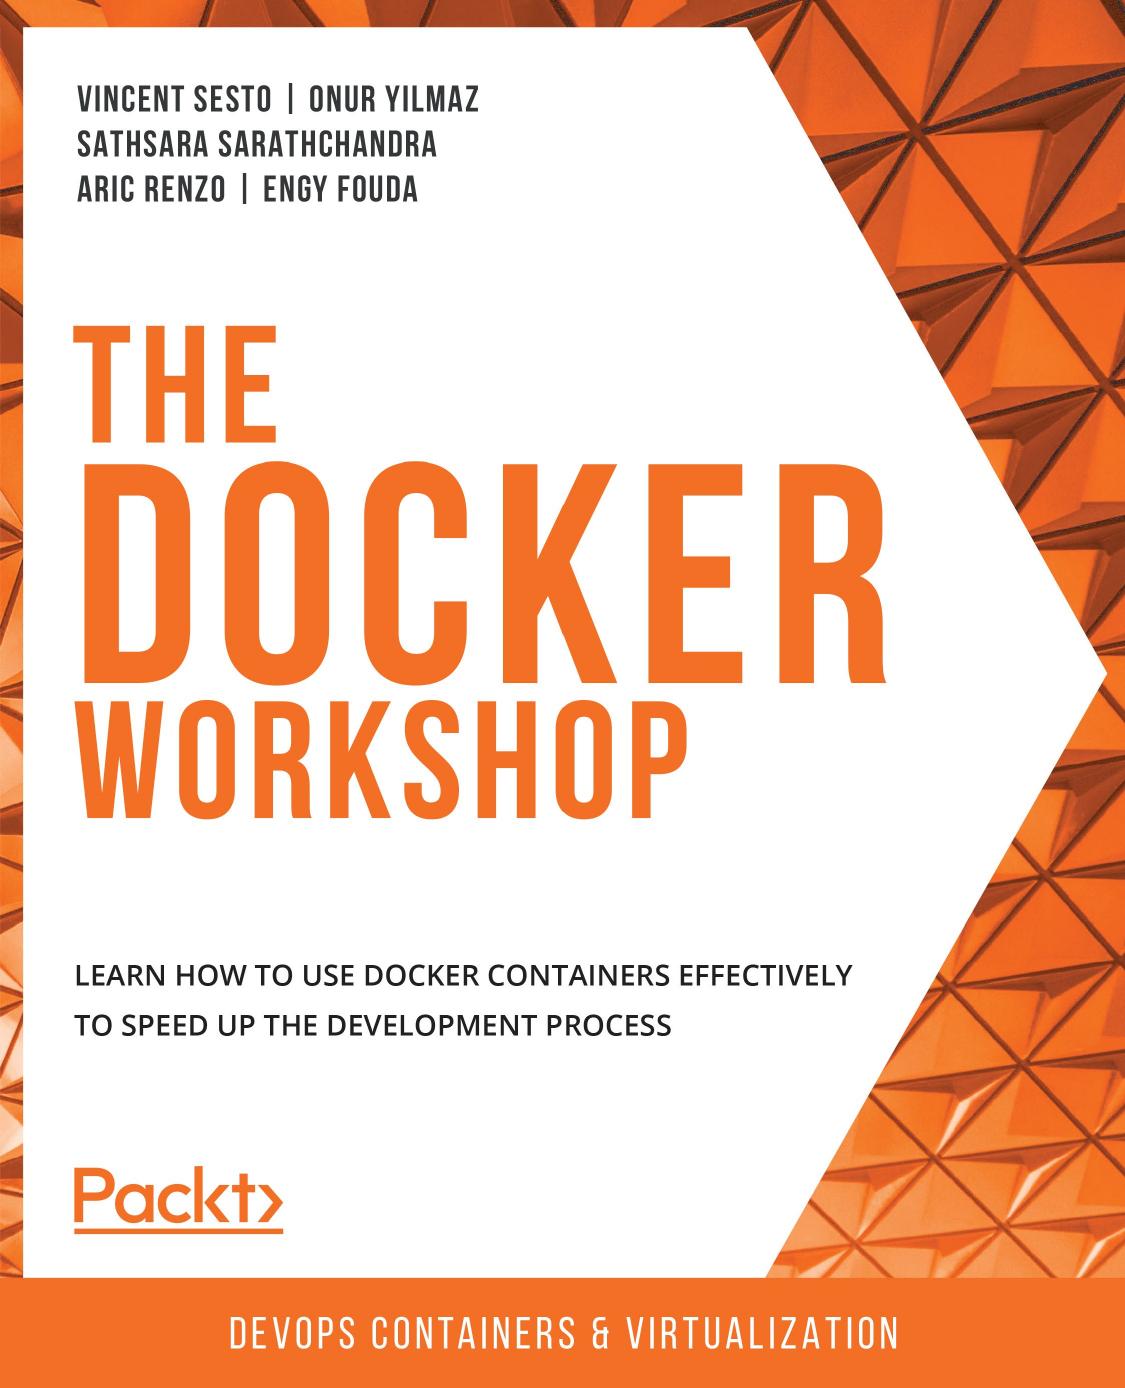 The the Docker Workshop: Learn How to Use Docker Containers Effectively to Speed Up the Development Process